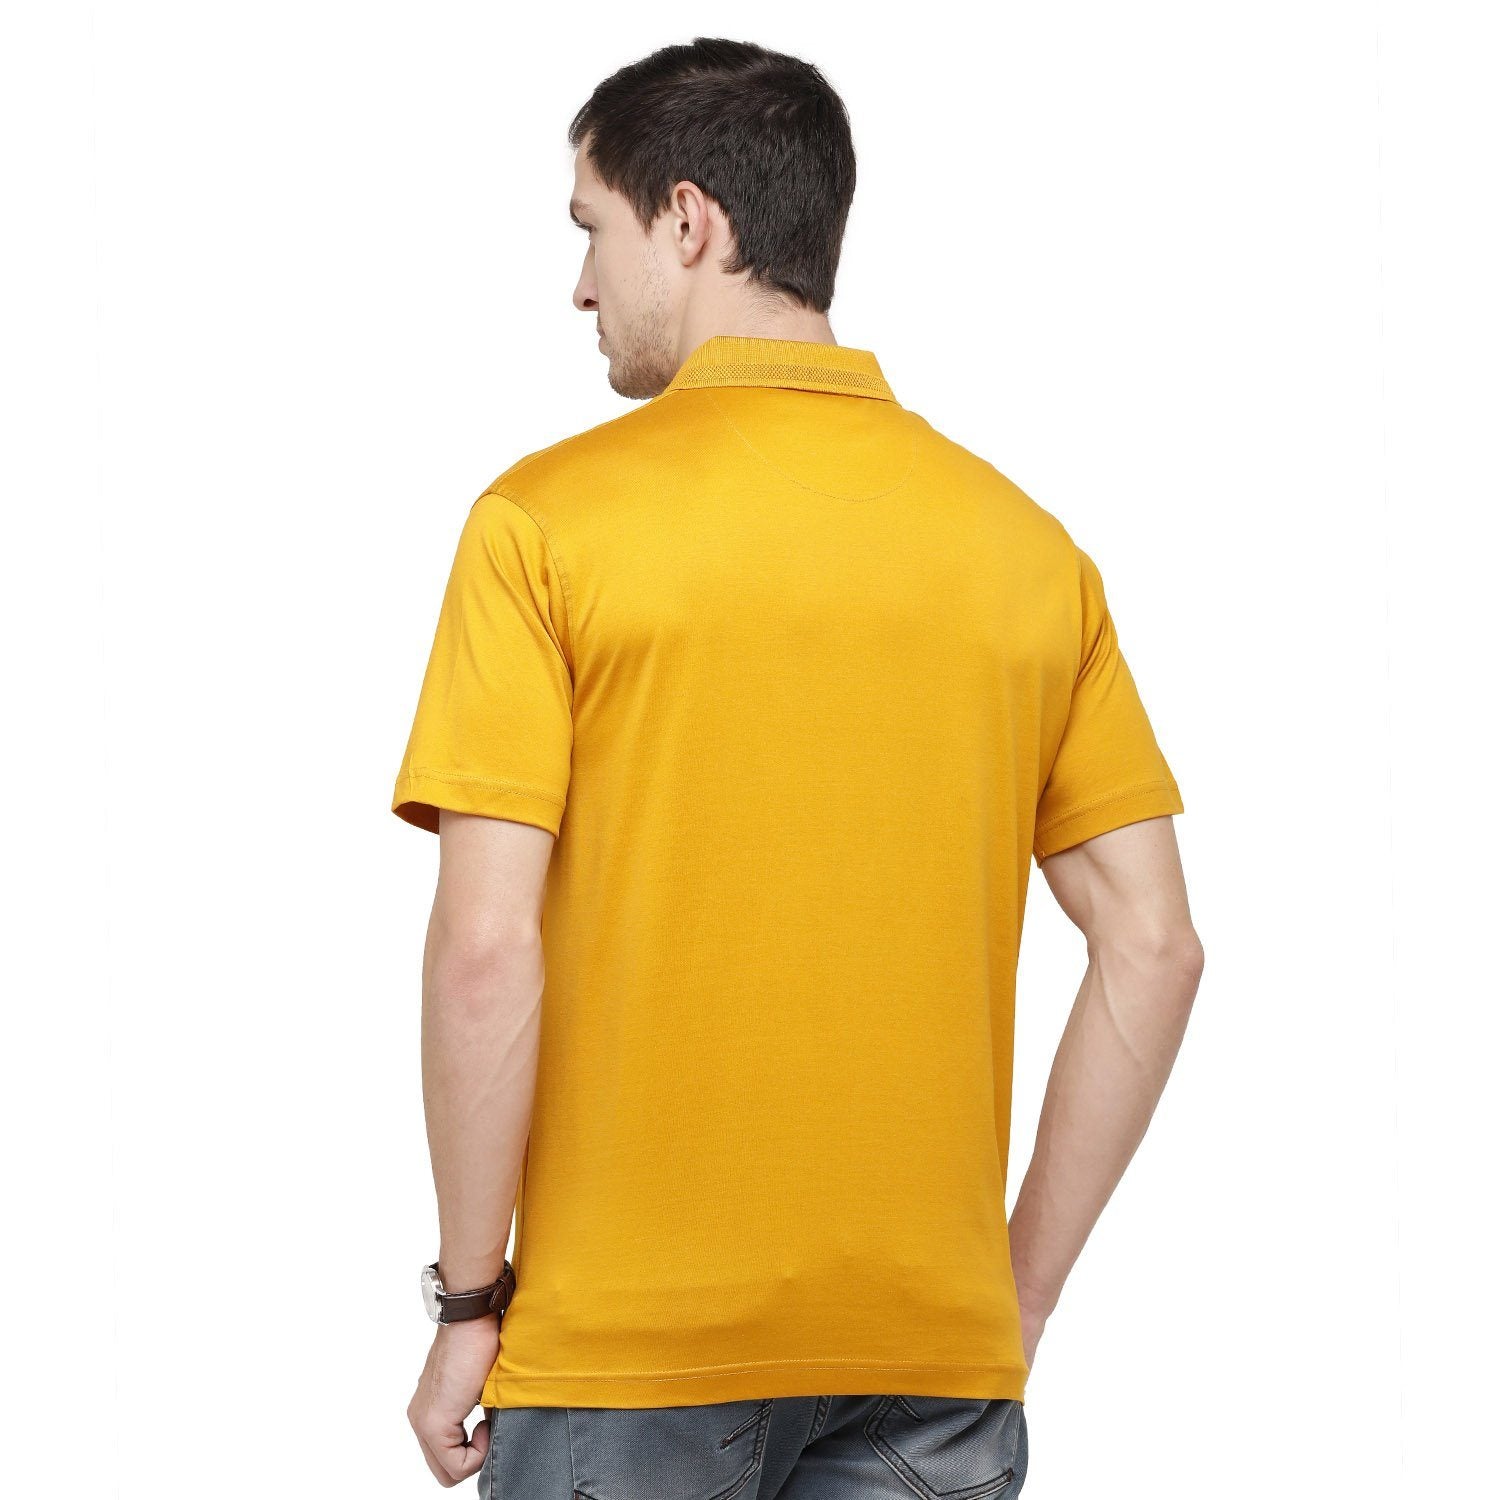 Classic Polo Mens Solid Polo Half Sleeve Authentic Fit 100% Cotton Golden Yellow T-Shirt - SEDOS-GOLDEN YELLOW T-shirt Classic Polo 